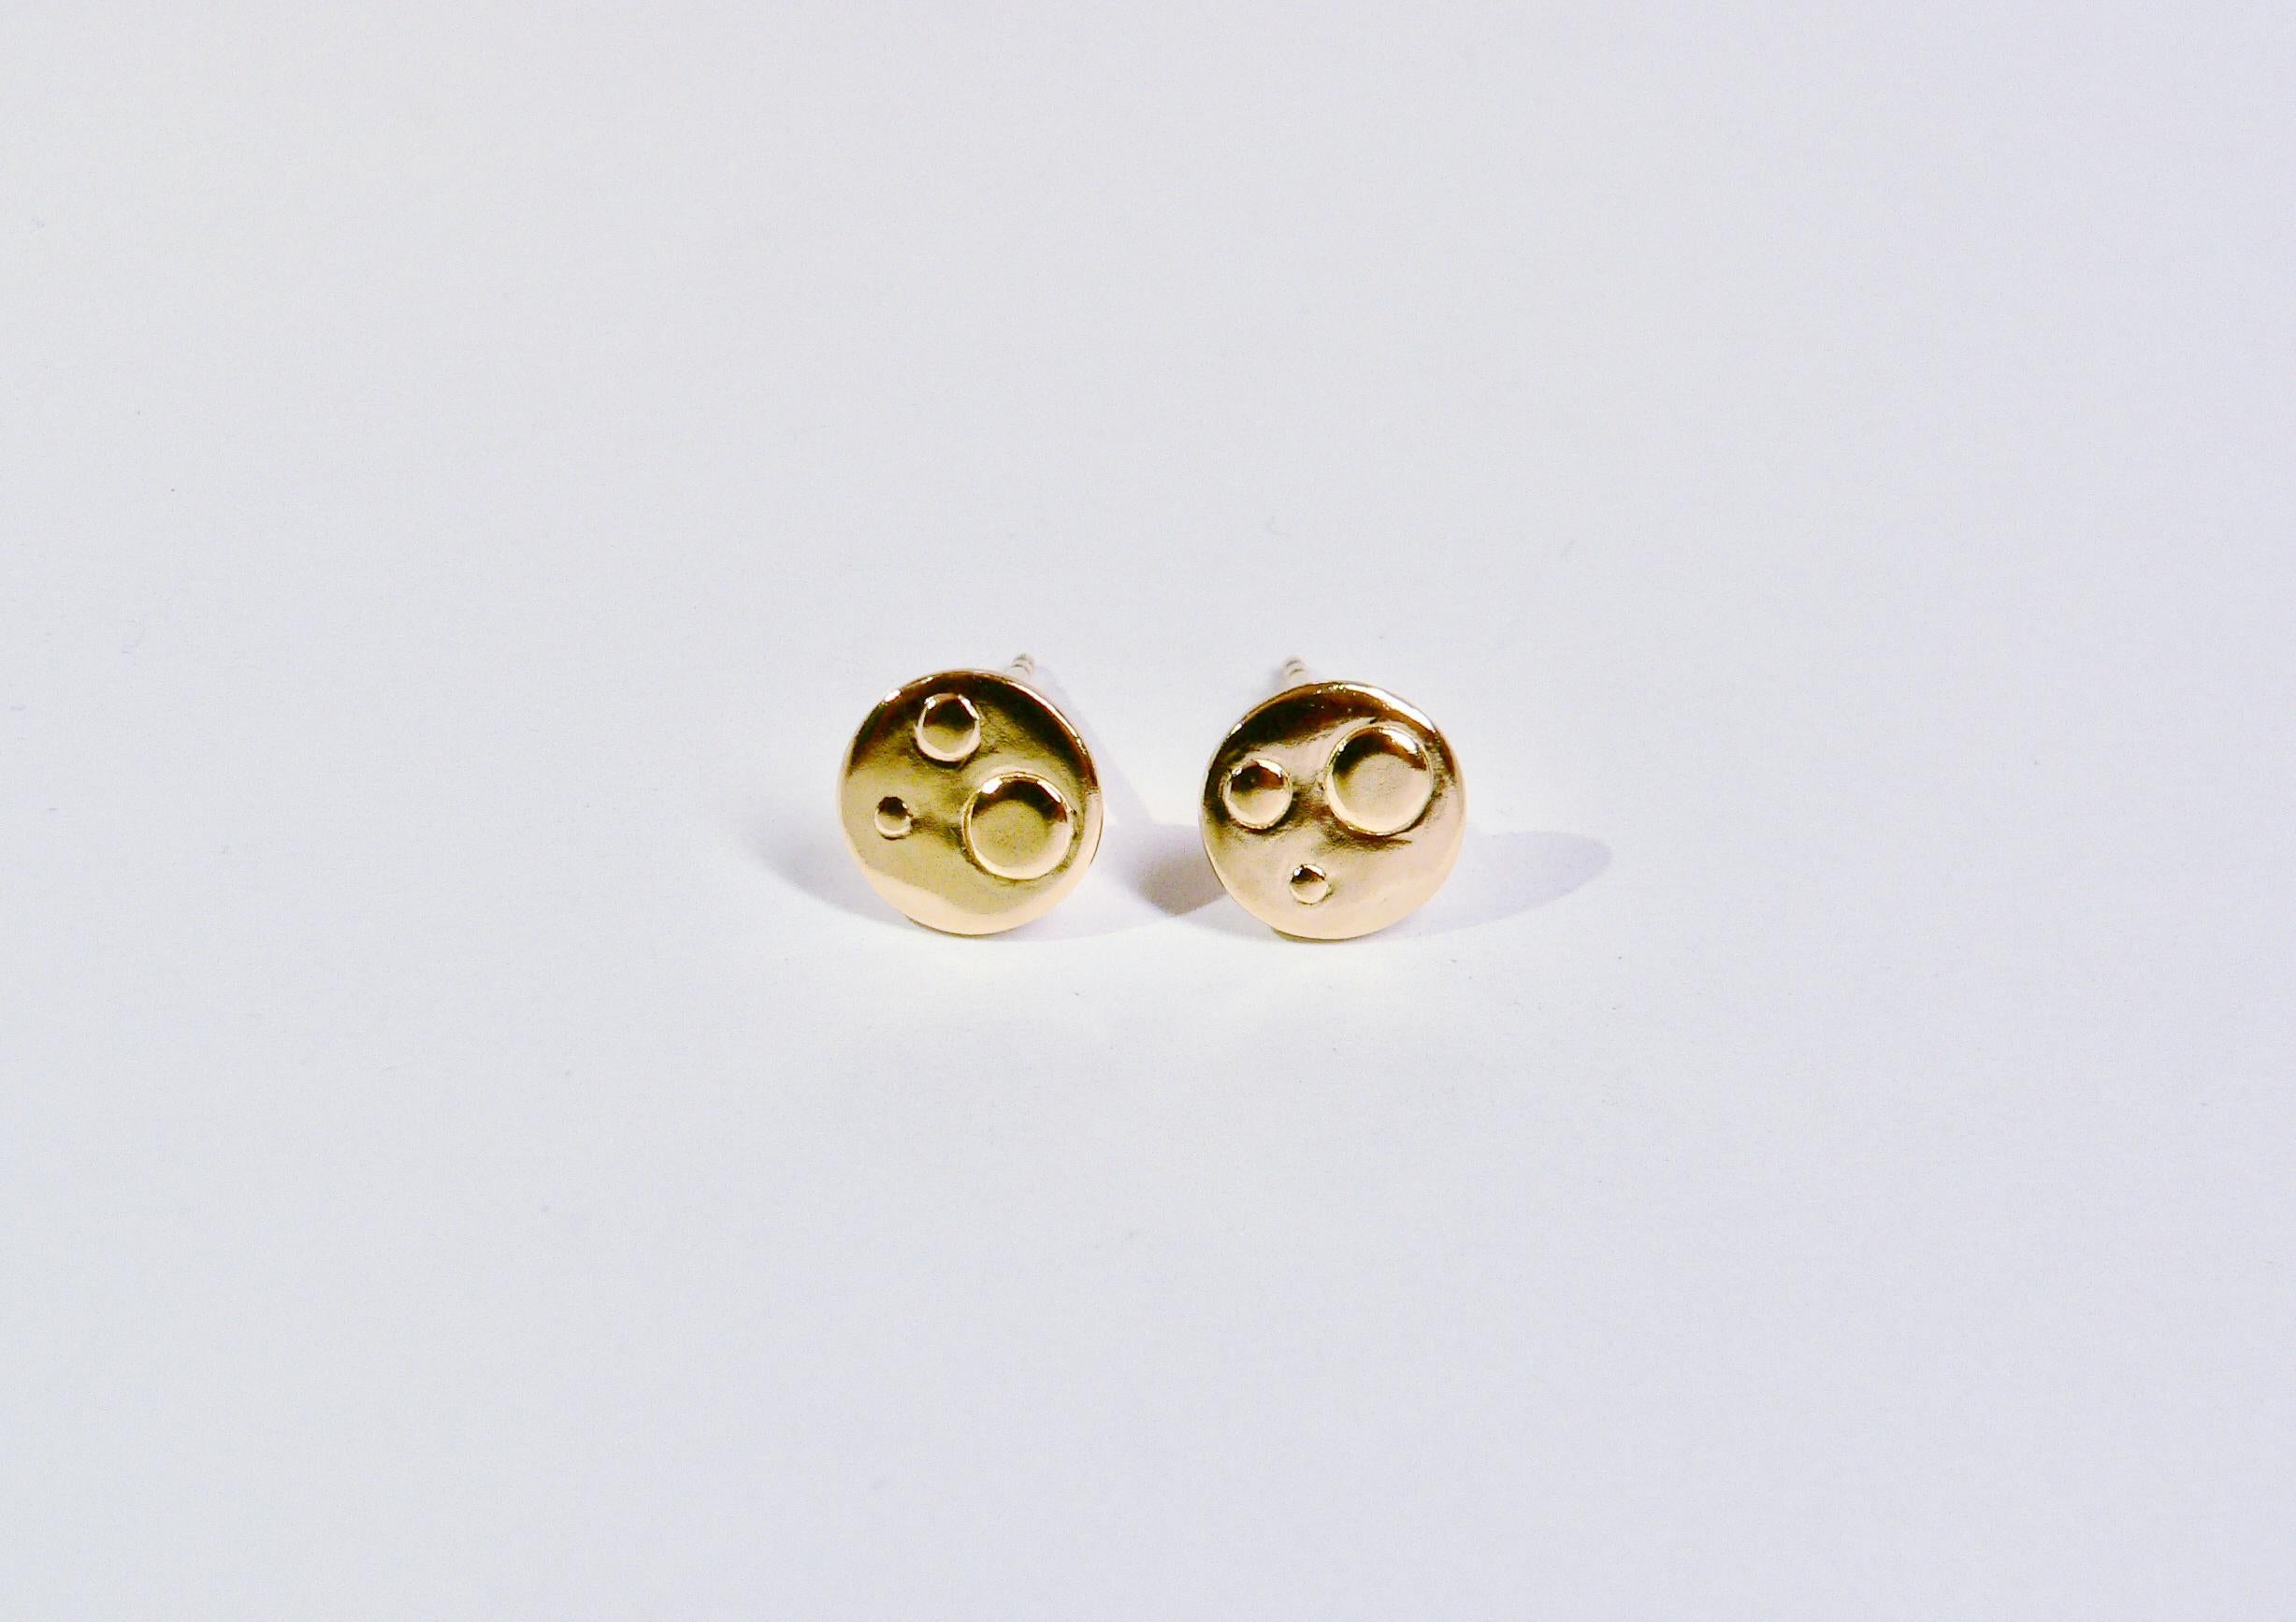 Artist Three Dots Stud Earring (Pair), Yellow Gold-Plated Sterling Silver For Sale